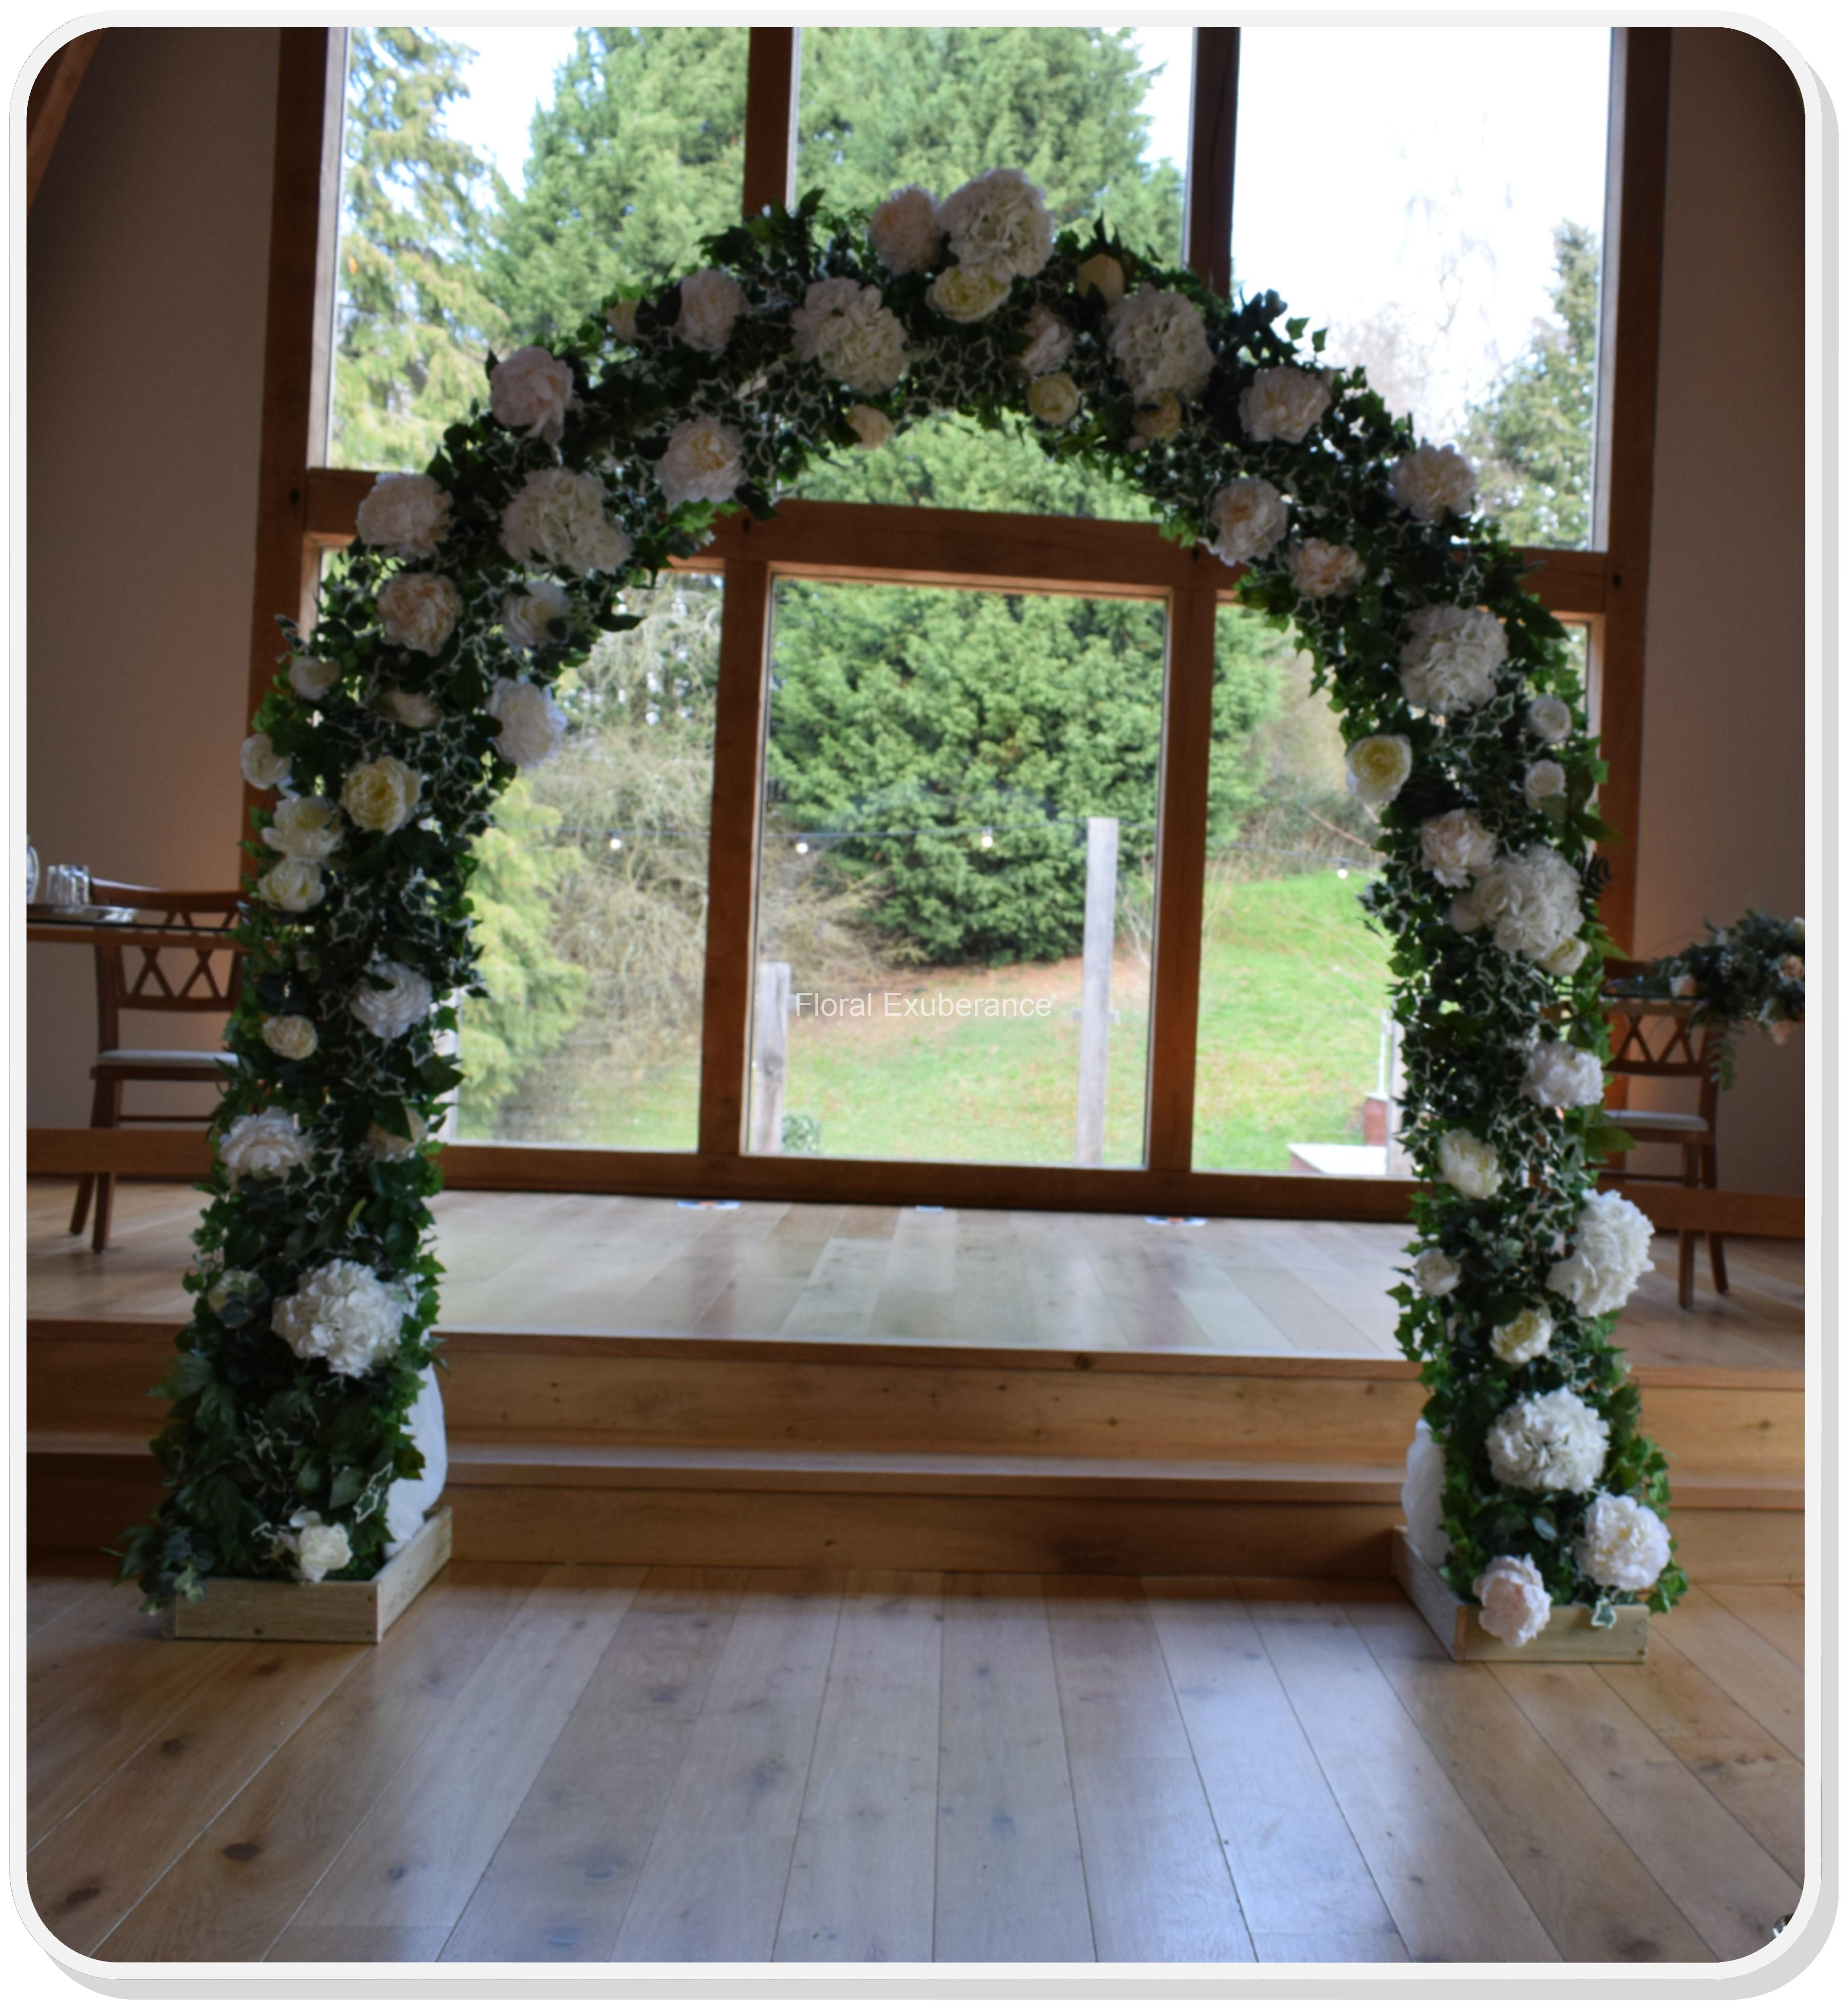 Artificial Flowers For Garden Arch at susanstrevino blog